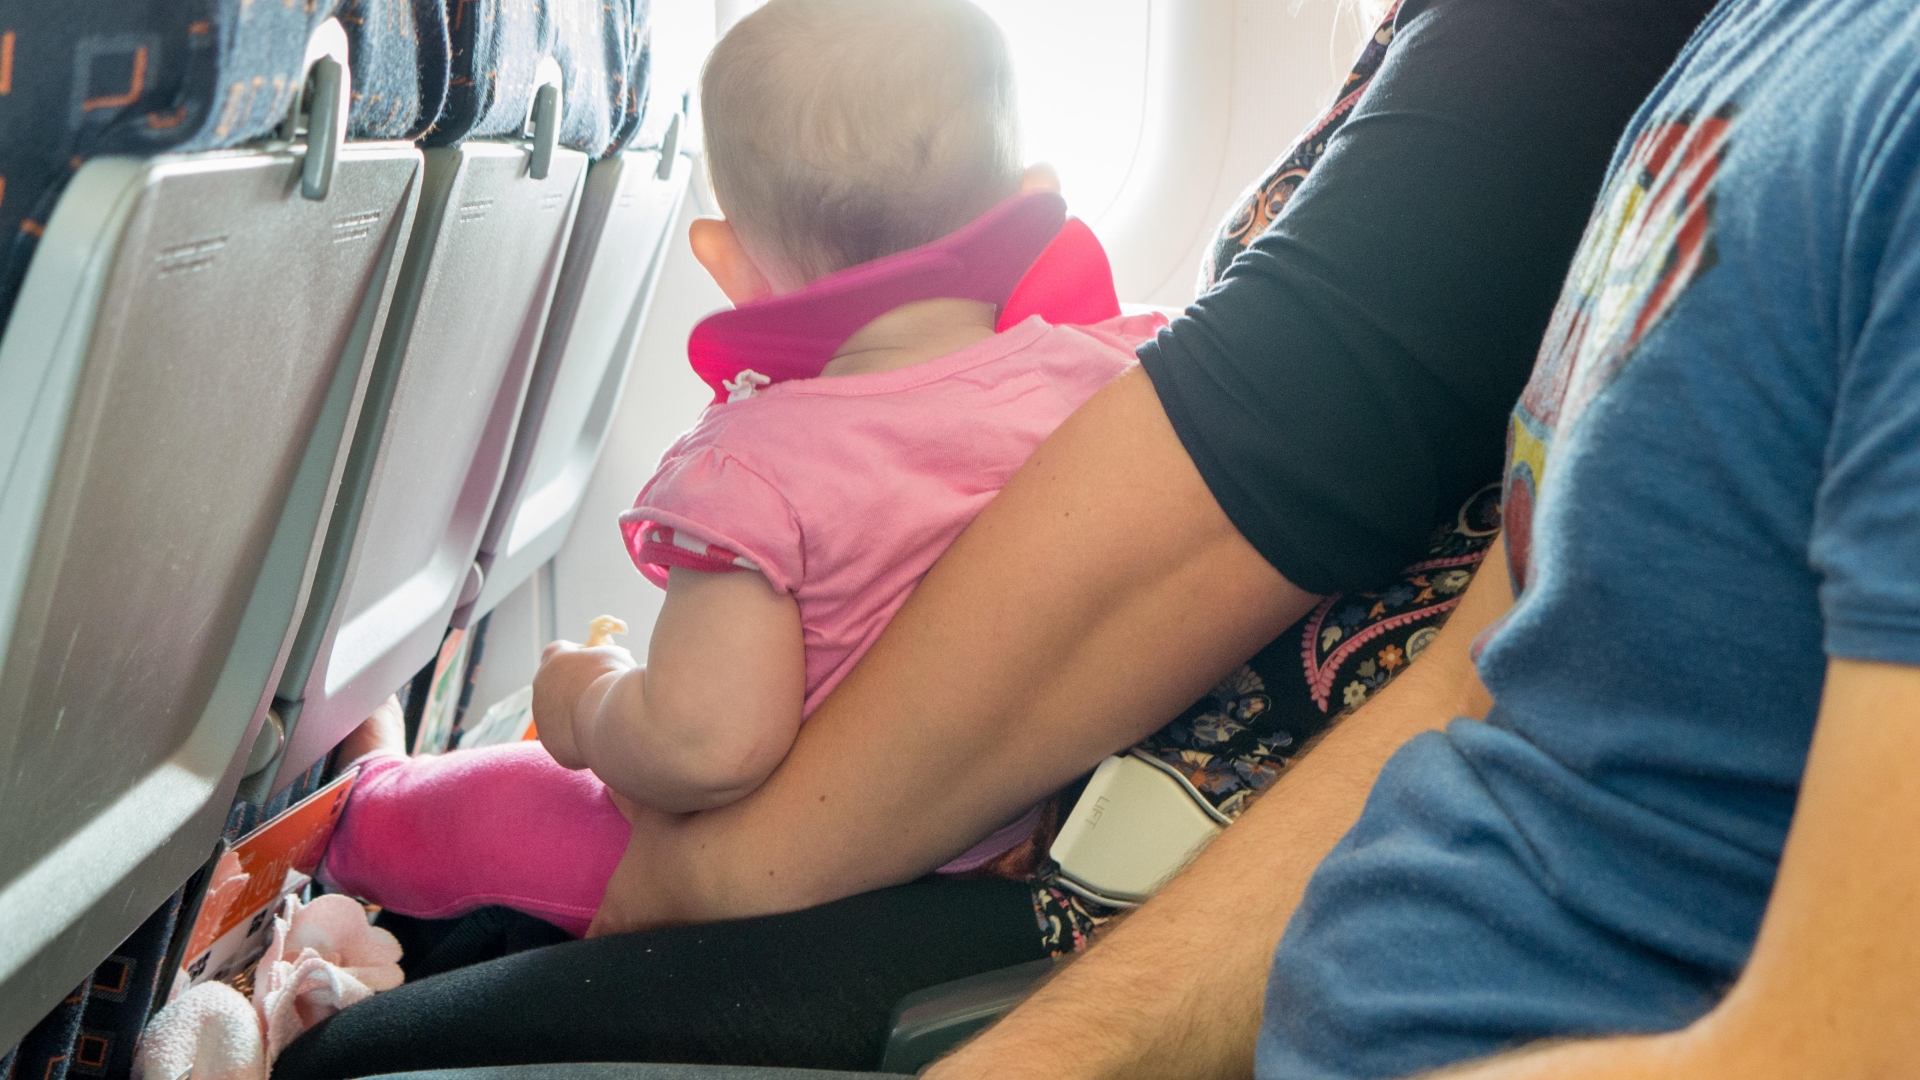 I refused to give up my seat on the plane for a baby, and other passengers said that I was too kind to the mother.